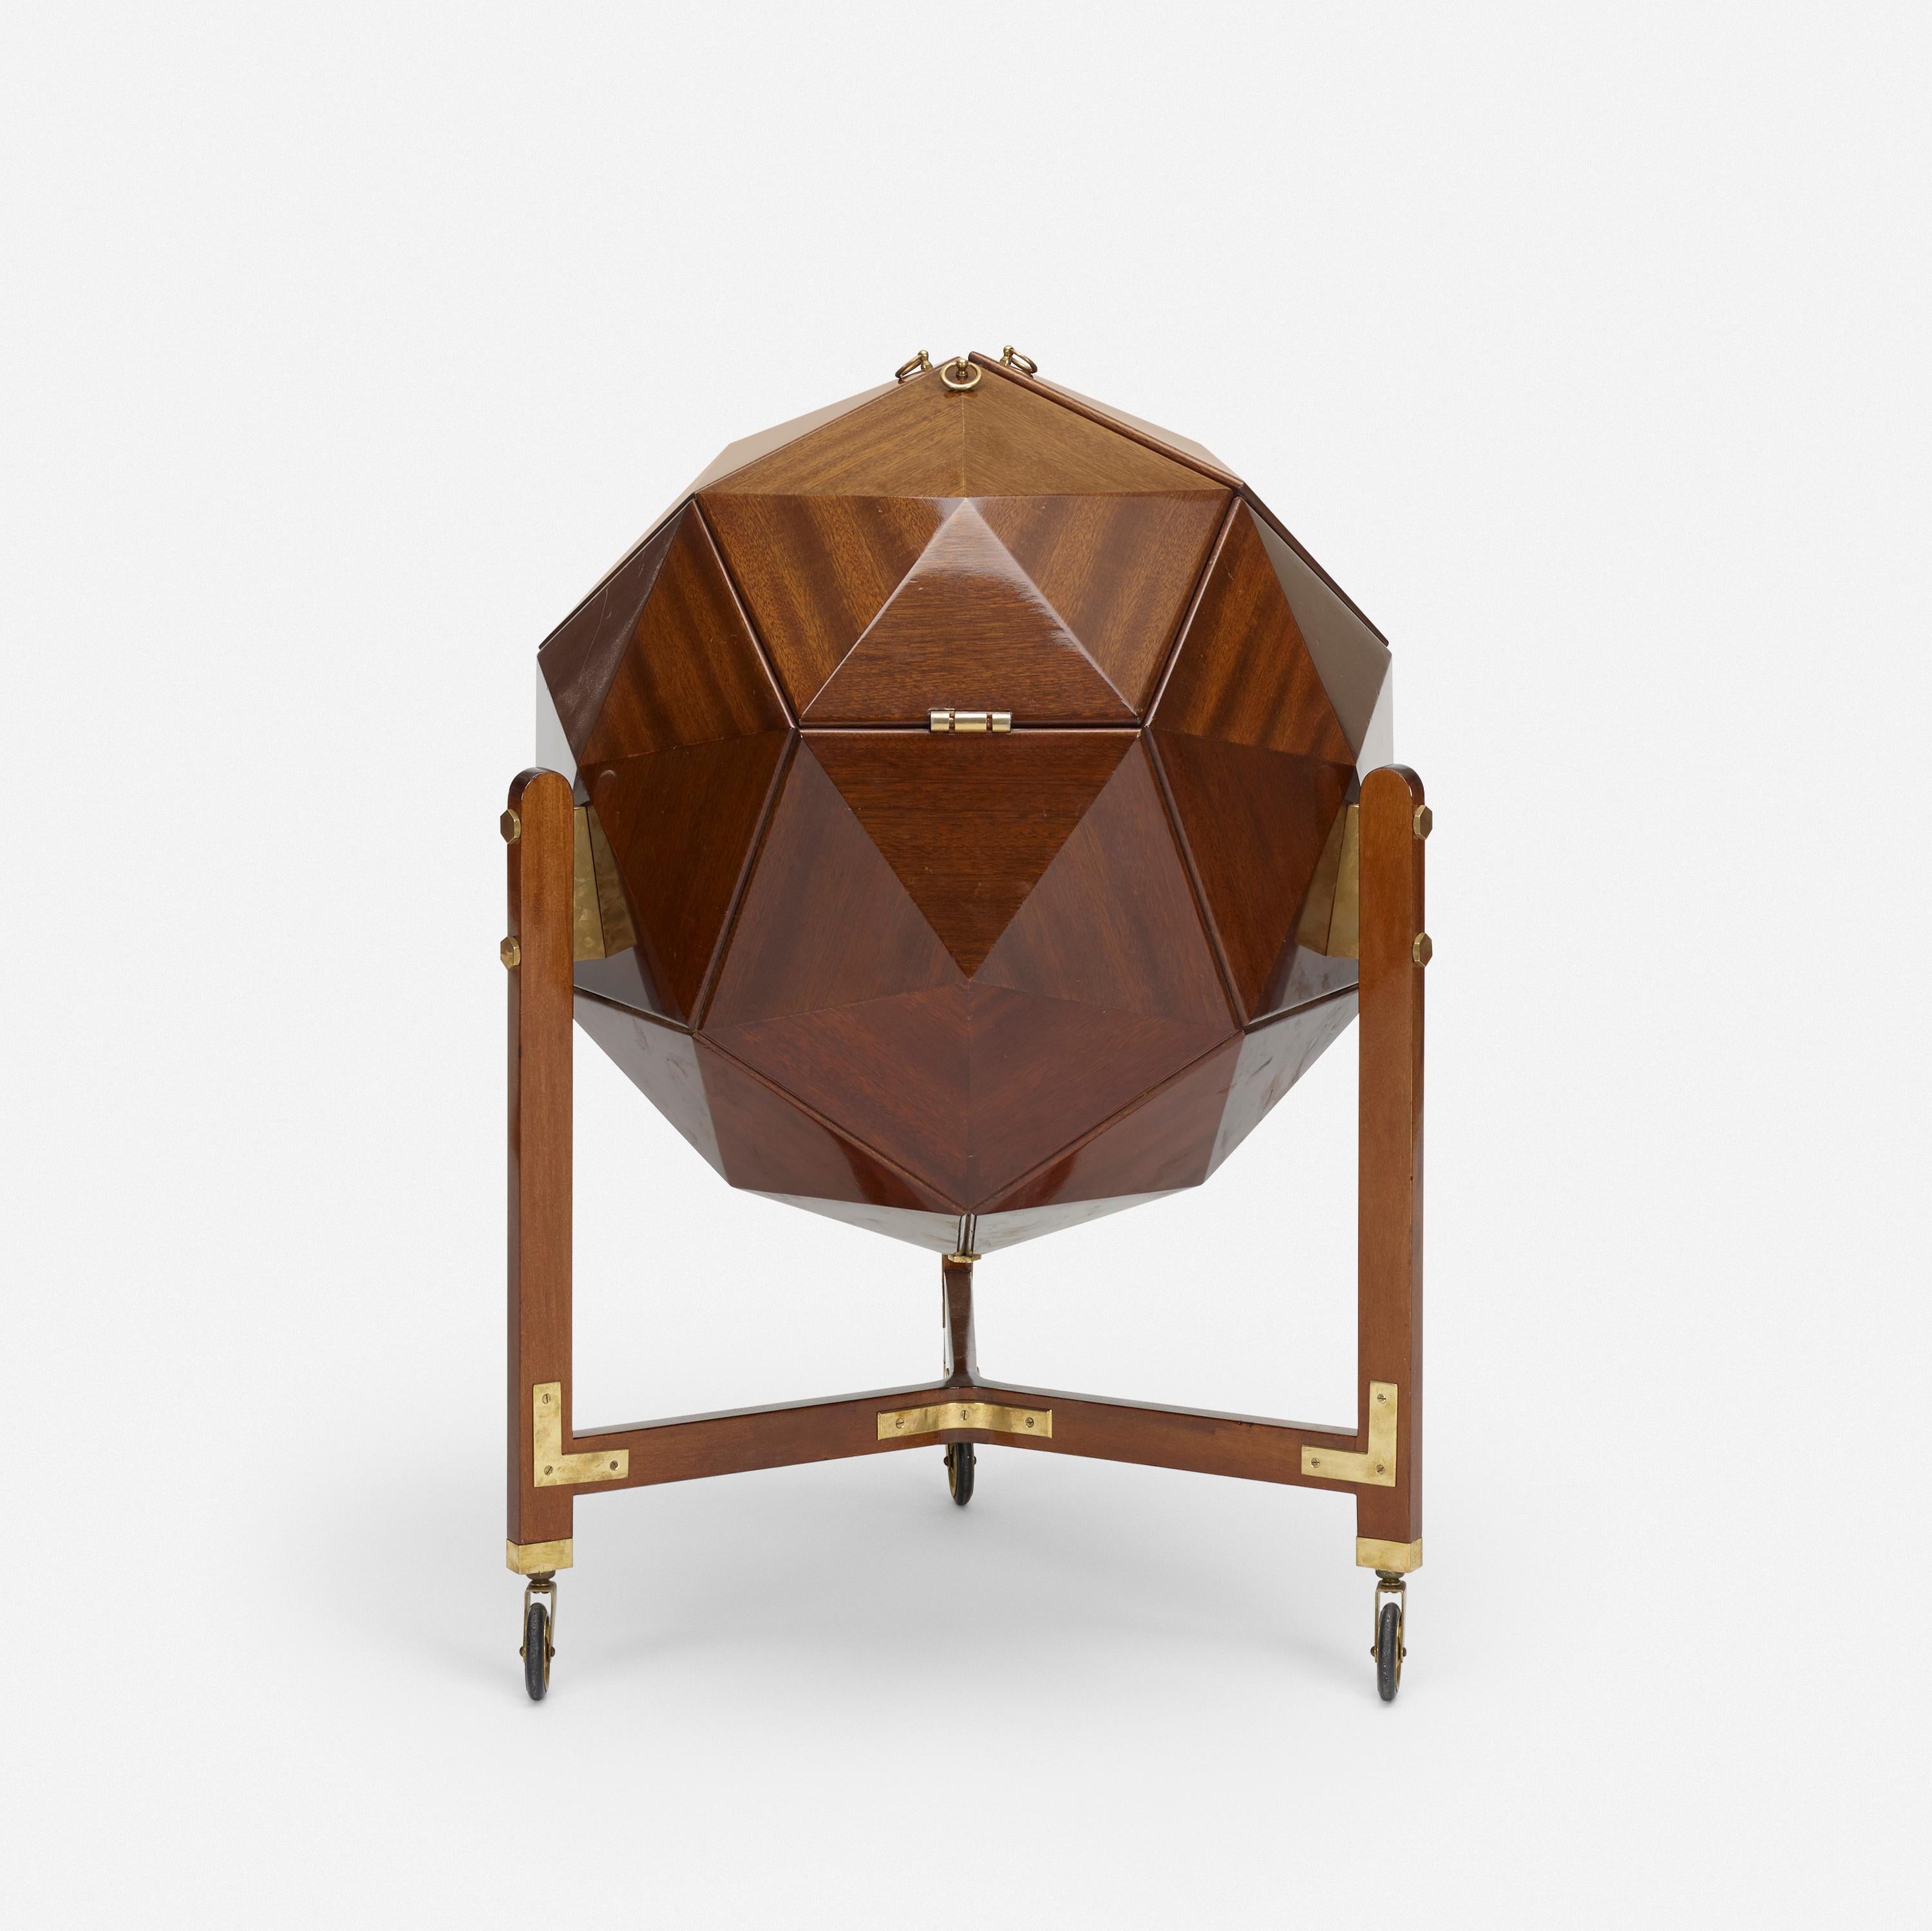 A rare and unusual polyhedron bar cabinet by M. Vuillermoz

Dambrine
France, circa 1960
mahogany, brass

Three mahogany doors lined in brass open to reveal storage for bottles and barware.

Doors are fitted with brass ring pulls.
 
Legs